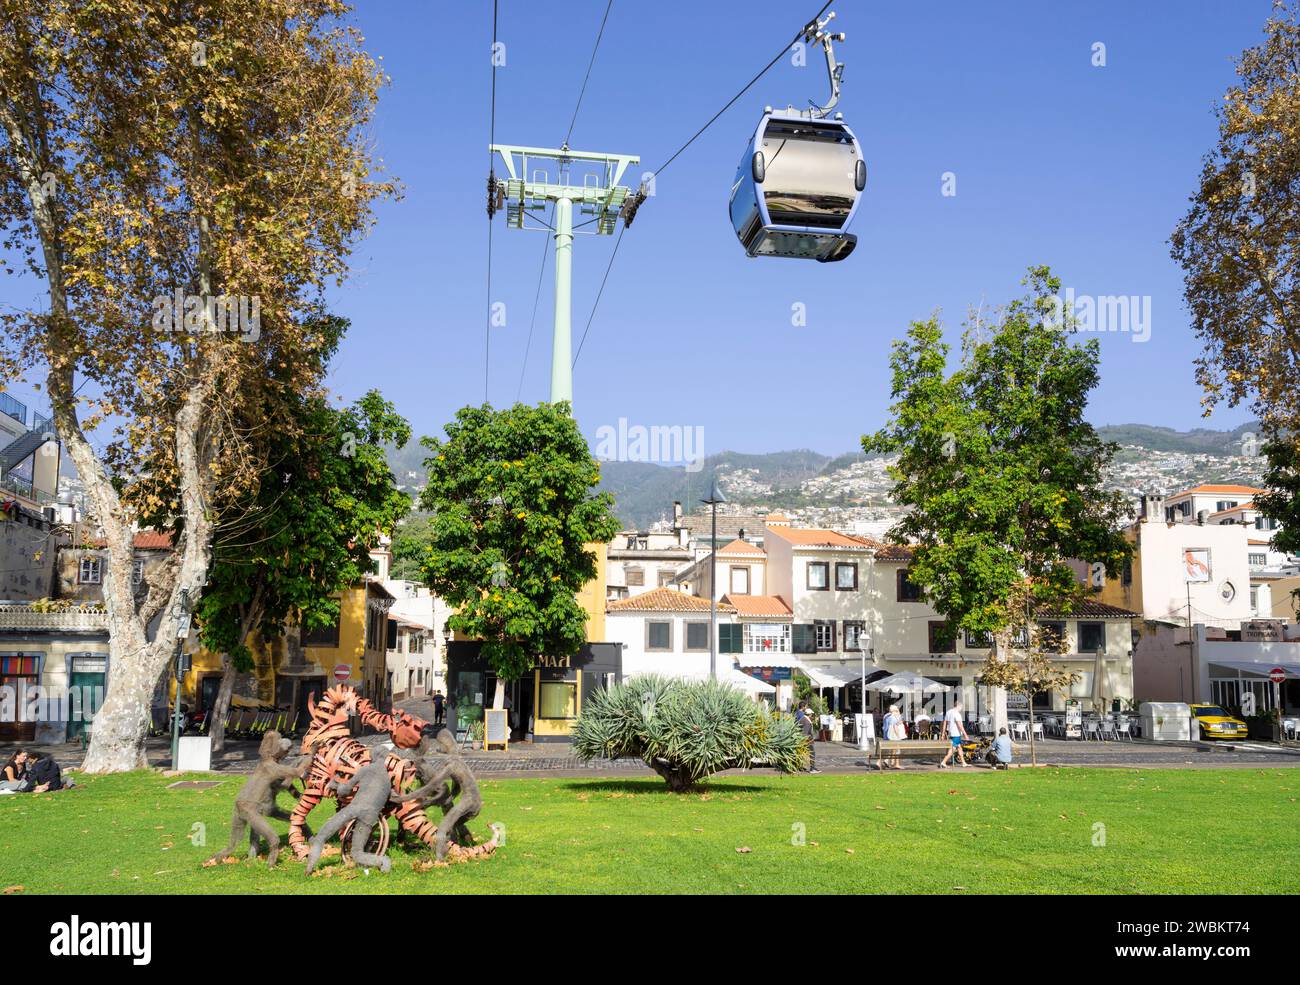 MADEIRA Funchal Madeira cable car connecting Zona velha old town Funchal to Monte up the mountain Fuchal zona velha Funchal Madeira Portugal EU Europe Stock Photo